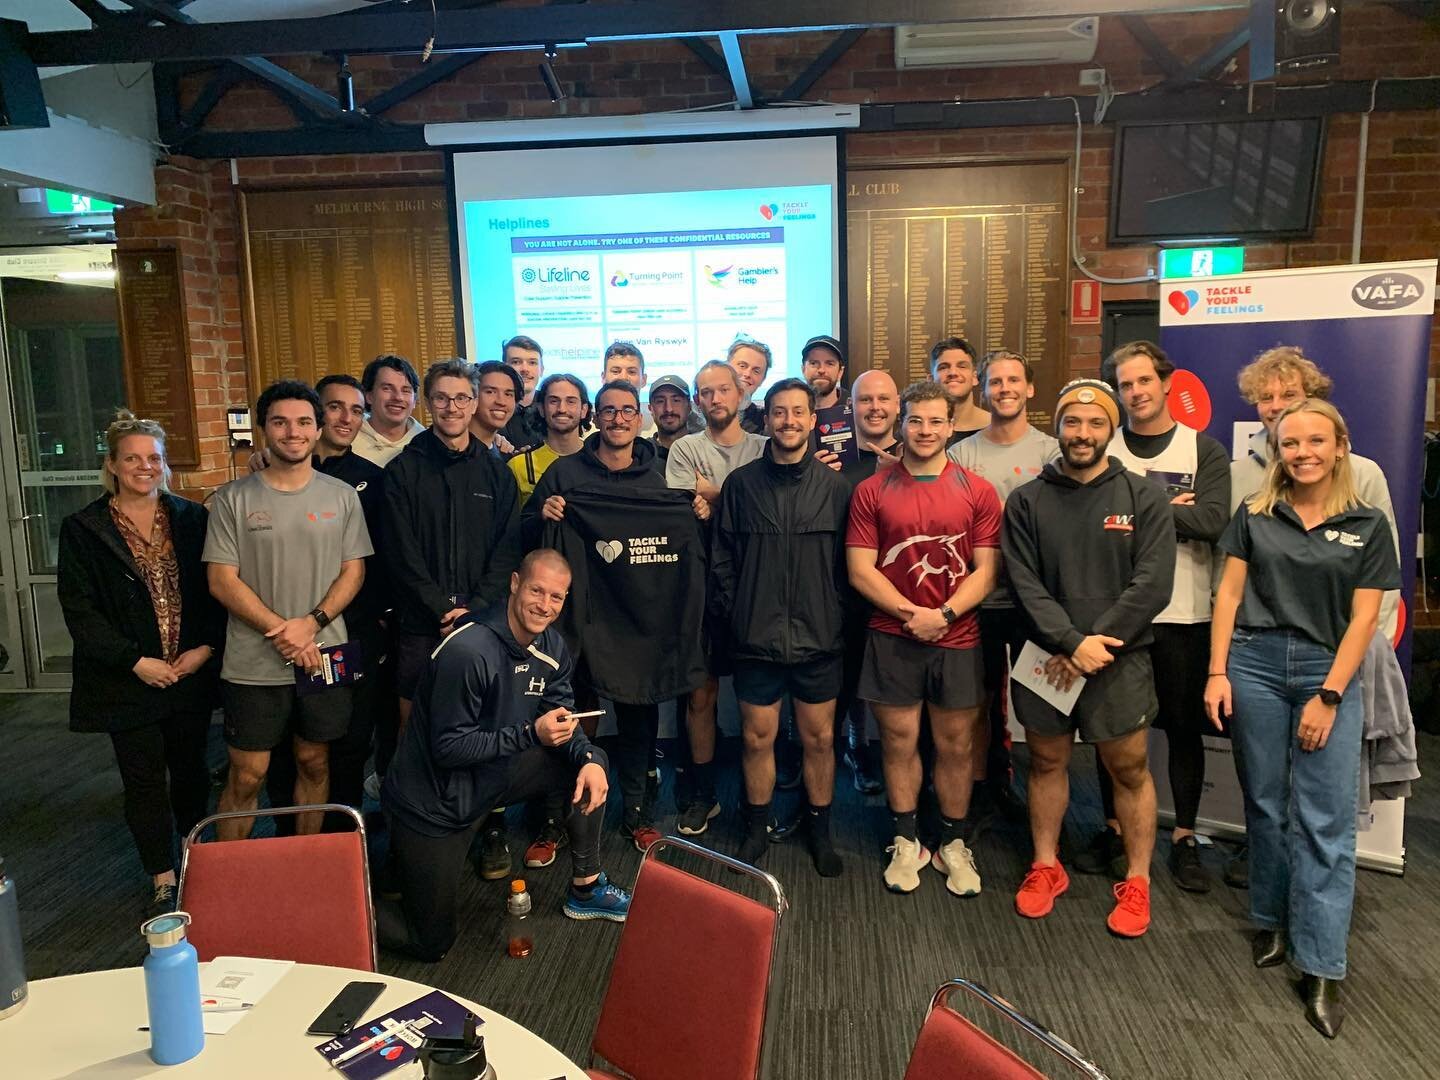 On Tuesday night we hosted our inaugural Tackle Your Feelings player workshop.

After running them for coaches and club leaders over the past two years, we&rsquo;re proud to be the first VAFA club to pilot the program for all players. The interactive